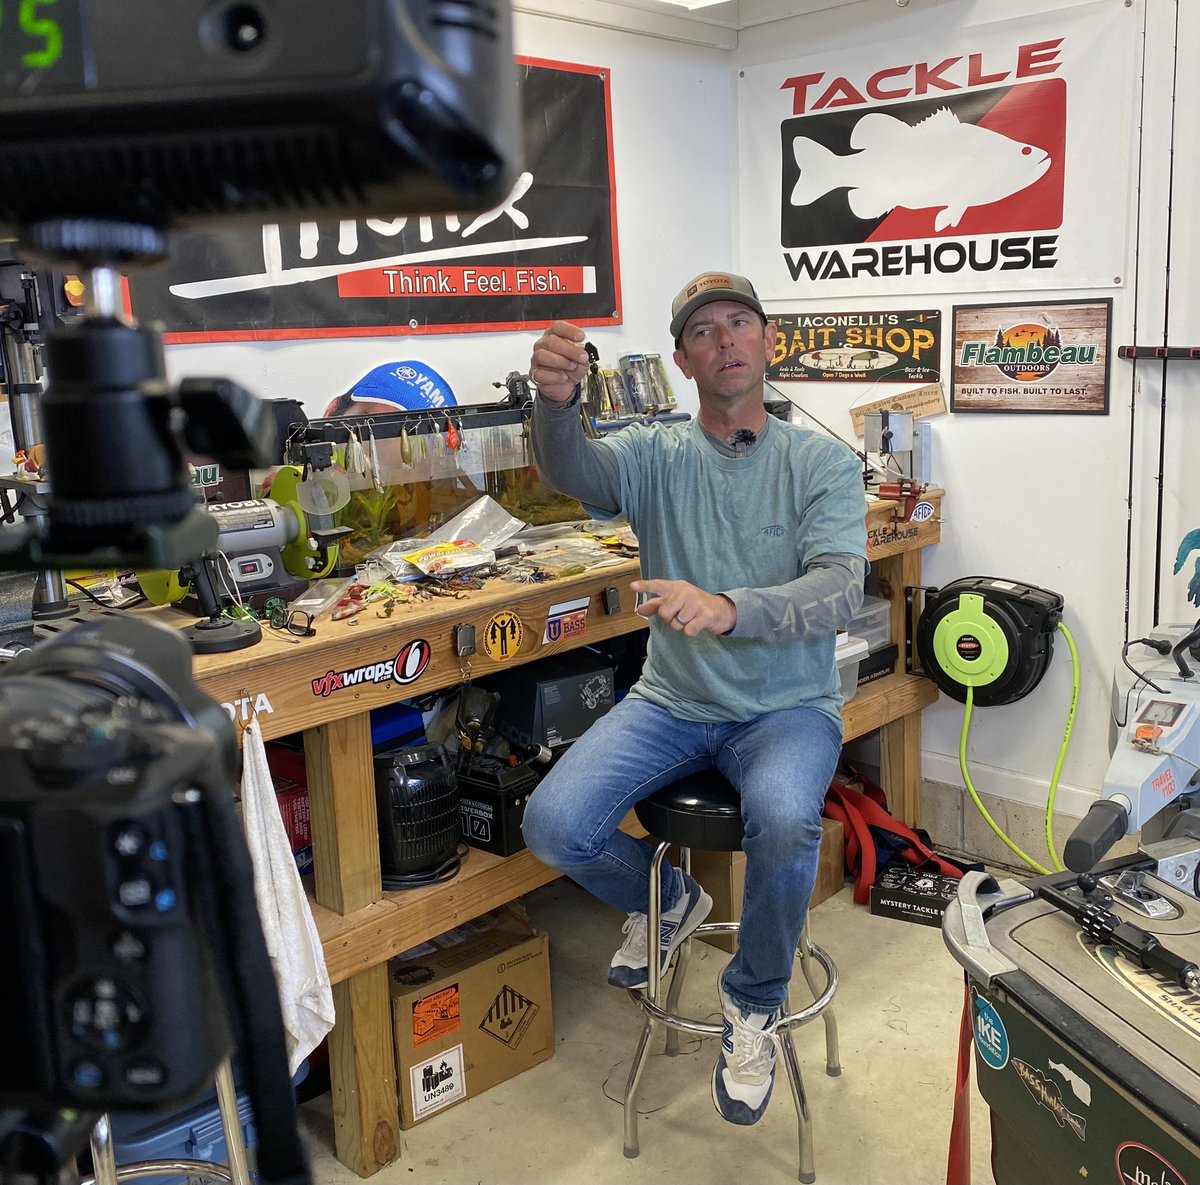 IKE in the SHOP!! Comment a TOPIC you want me to cover!!!

@TackleWarehouse @flambeauoutdoor @Molixfishing 

#Ike #Ikeapproved #NeverGiveUp #IkeintheShop